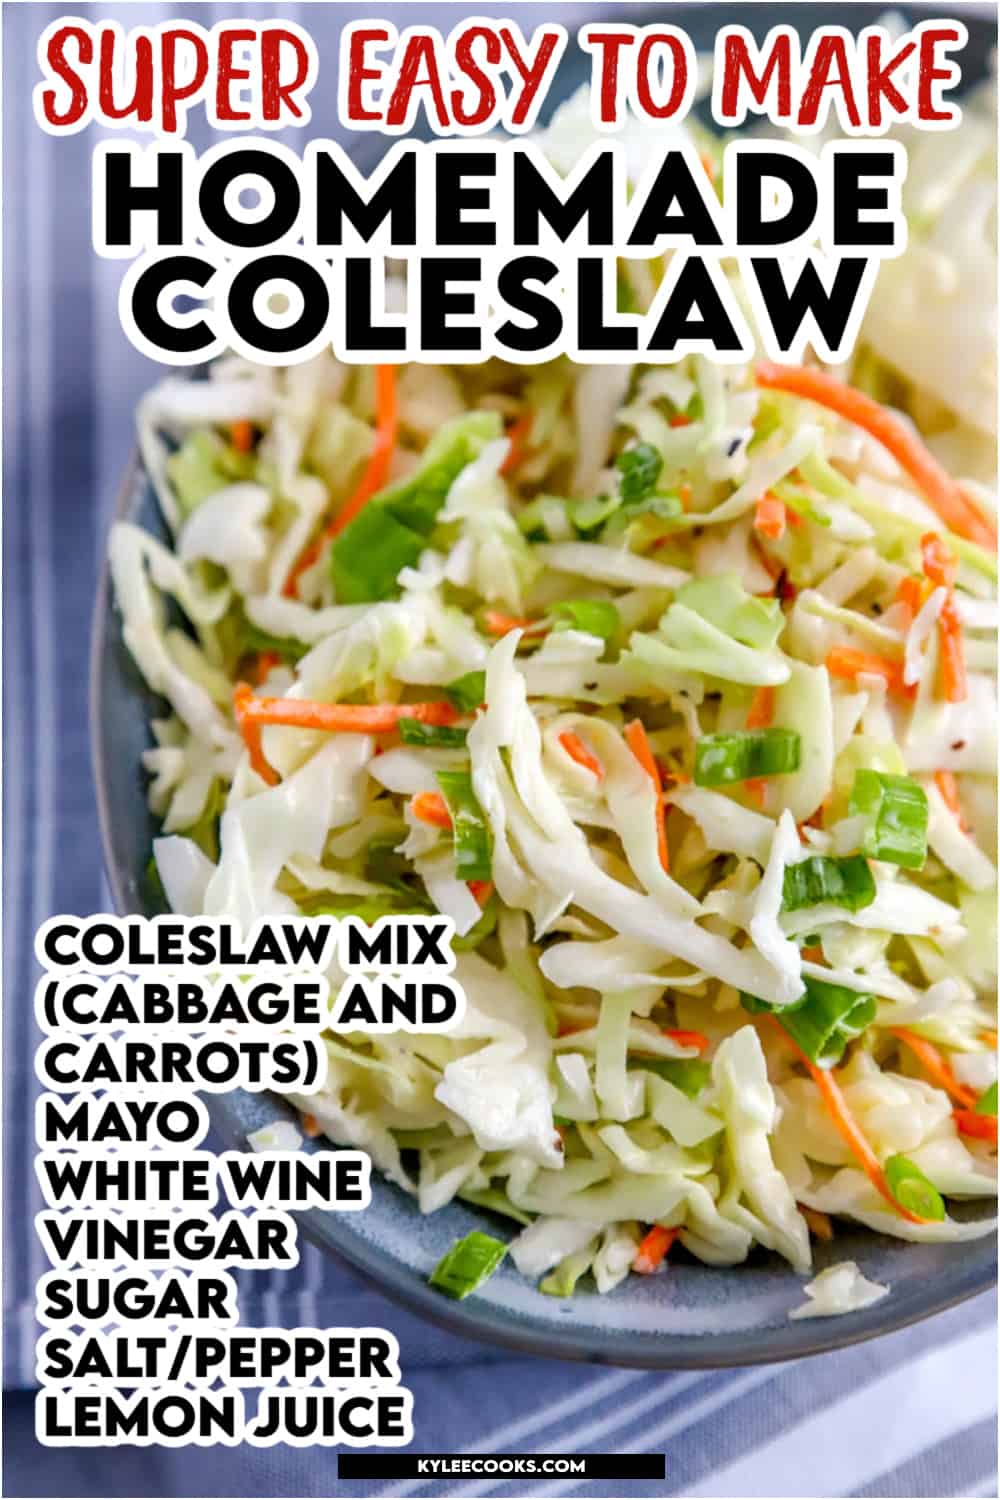 homemade coleslaw in a blue bowl with recipe name and ingredients overlaid in text.